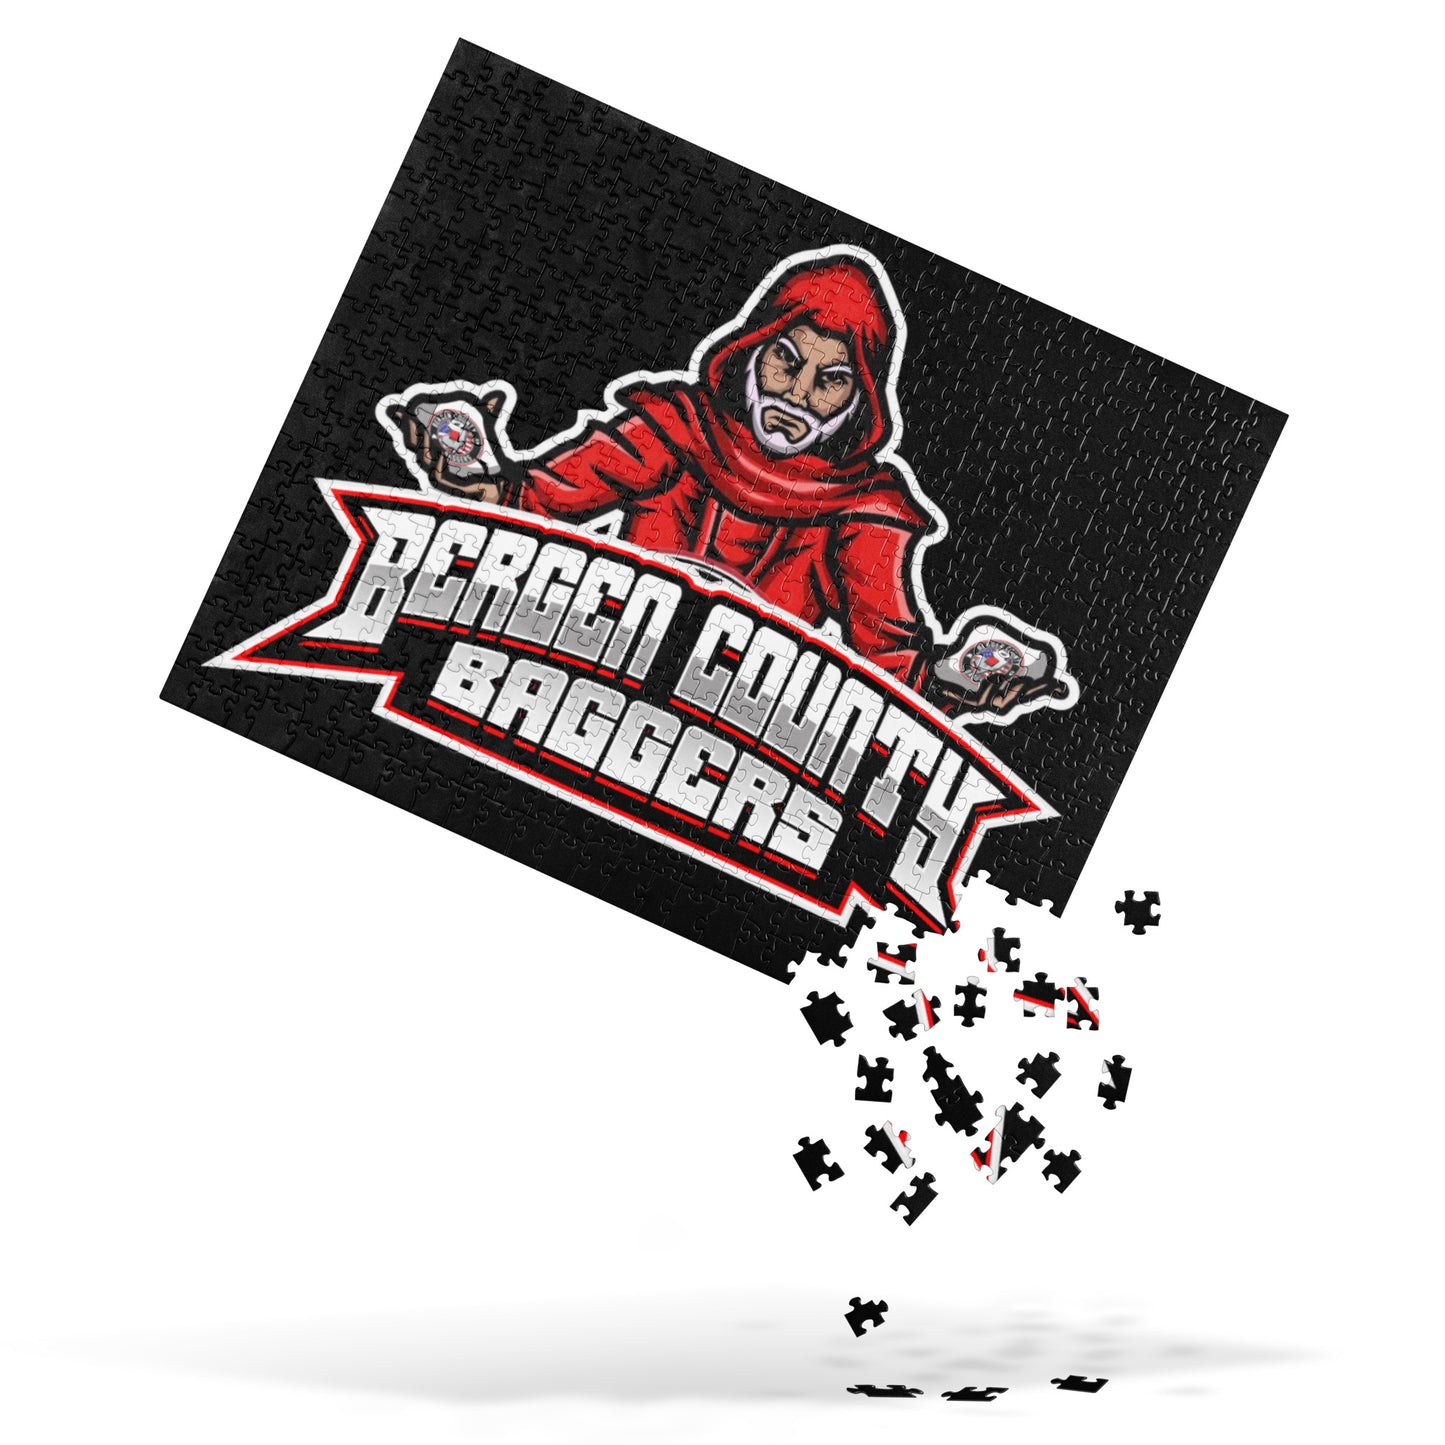 Bergen County Baggers Jigsaw puzzle